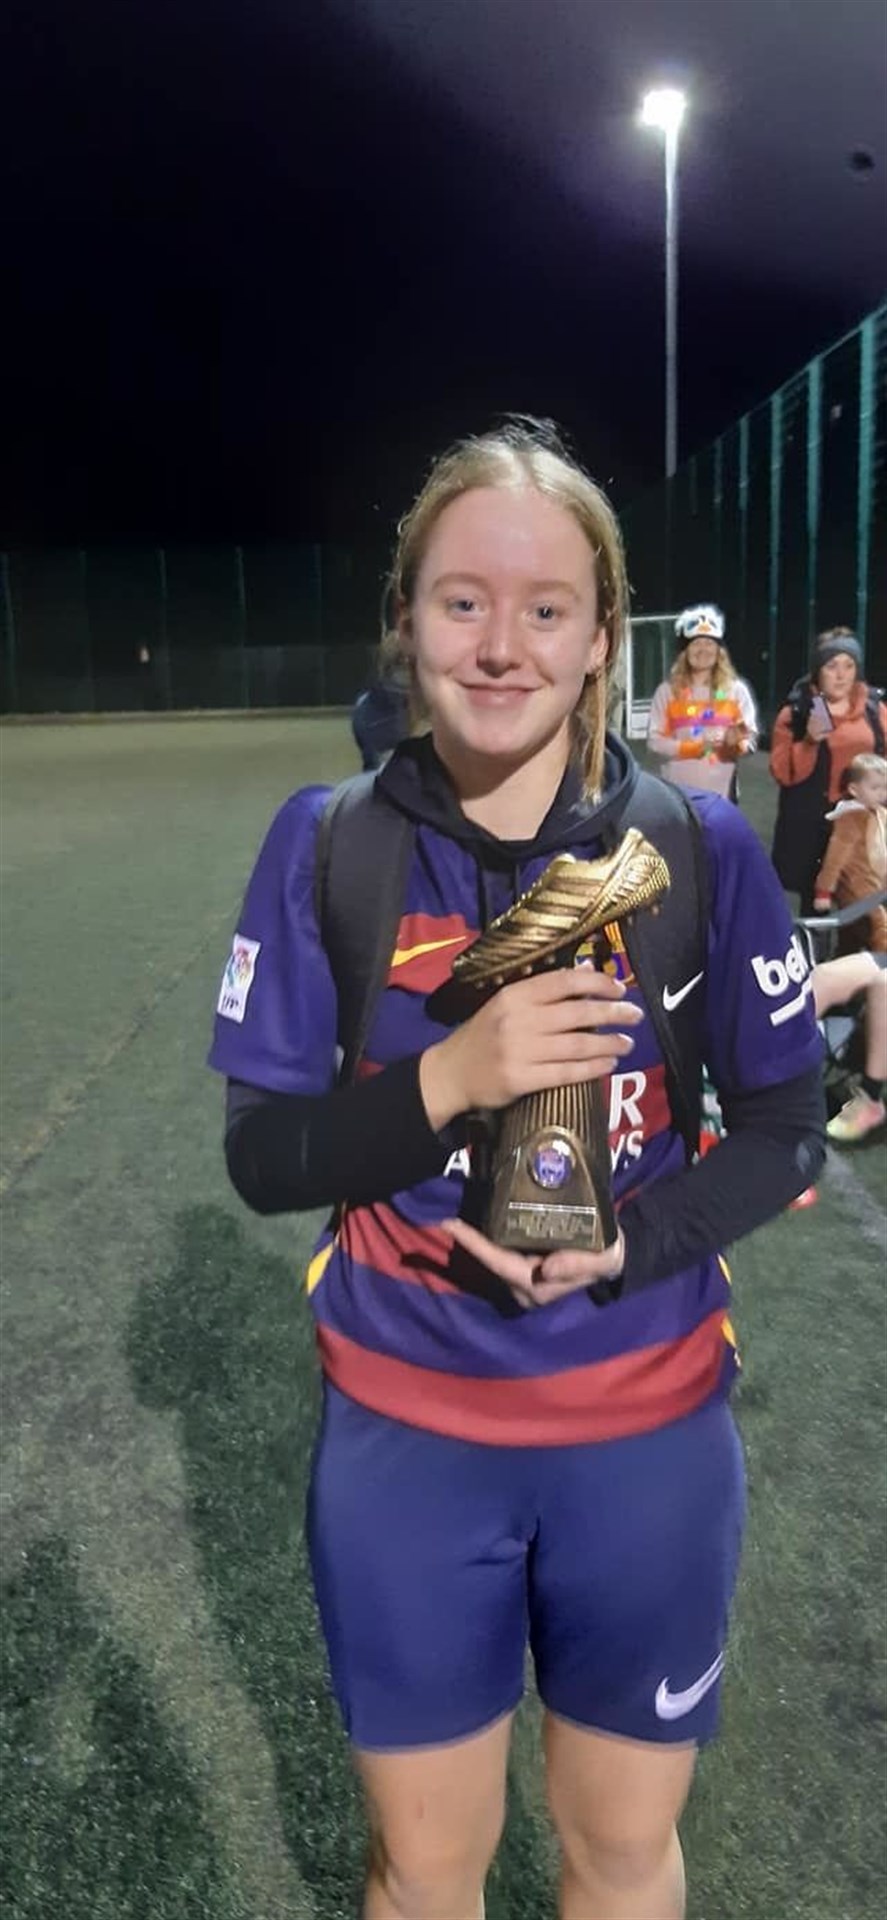 Ross County Girls' under-15 squad voted Sophie Skinner as the most improved player for 2021.